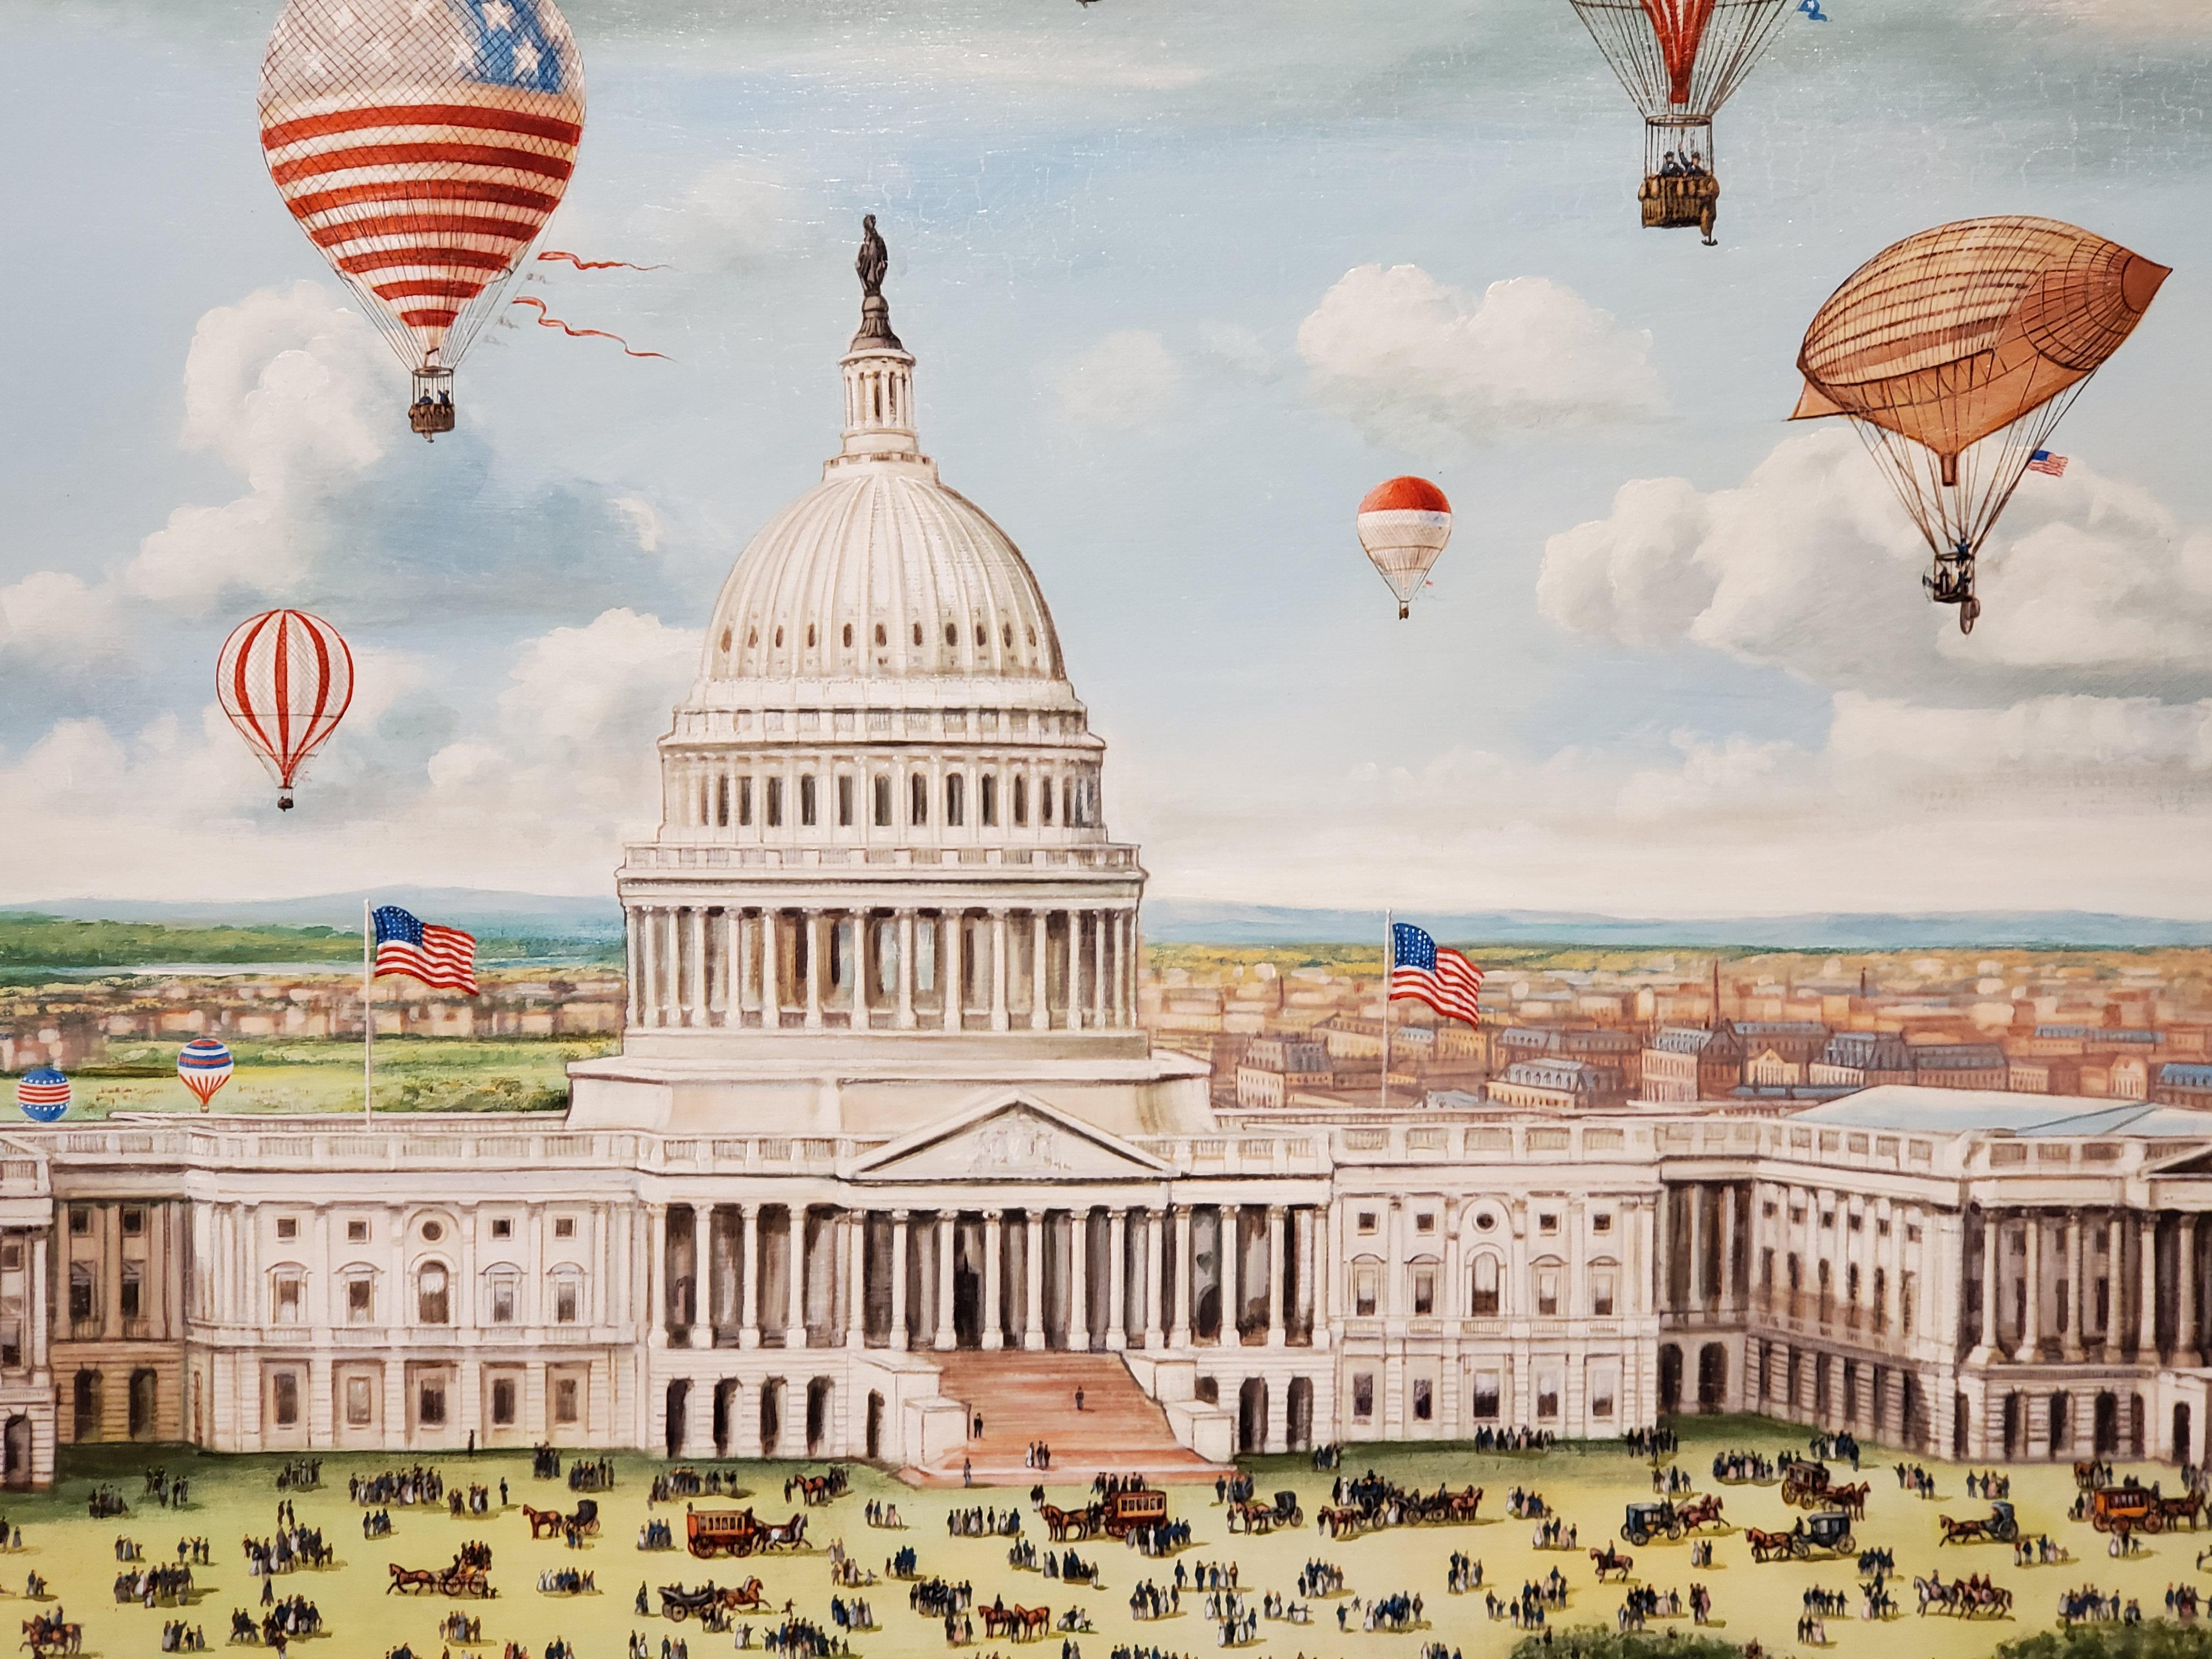 Grand 19th century Aeronautical Spectacular Over the US Capitol by Morris Flight 3